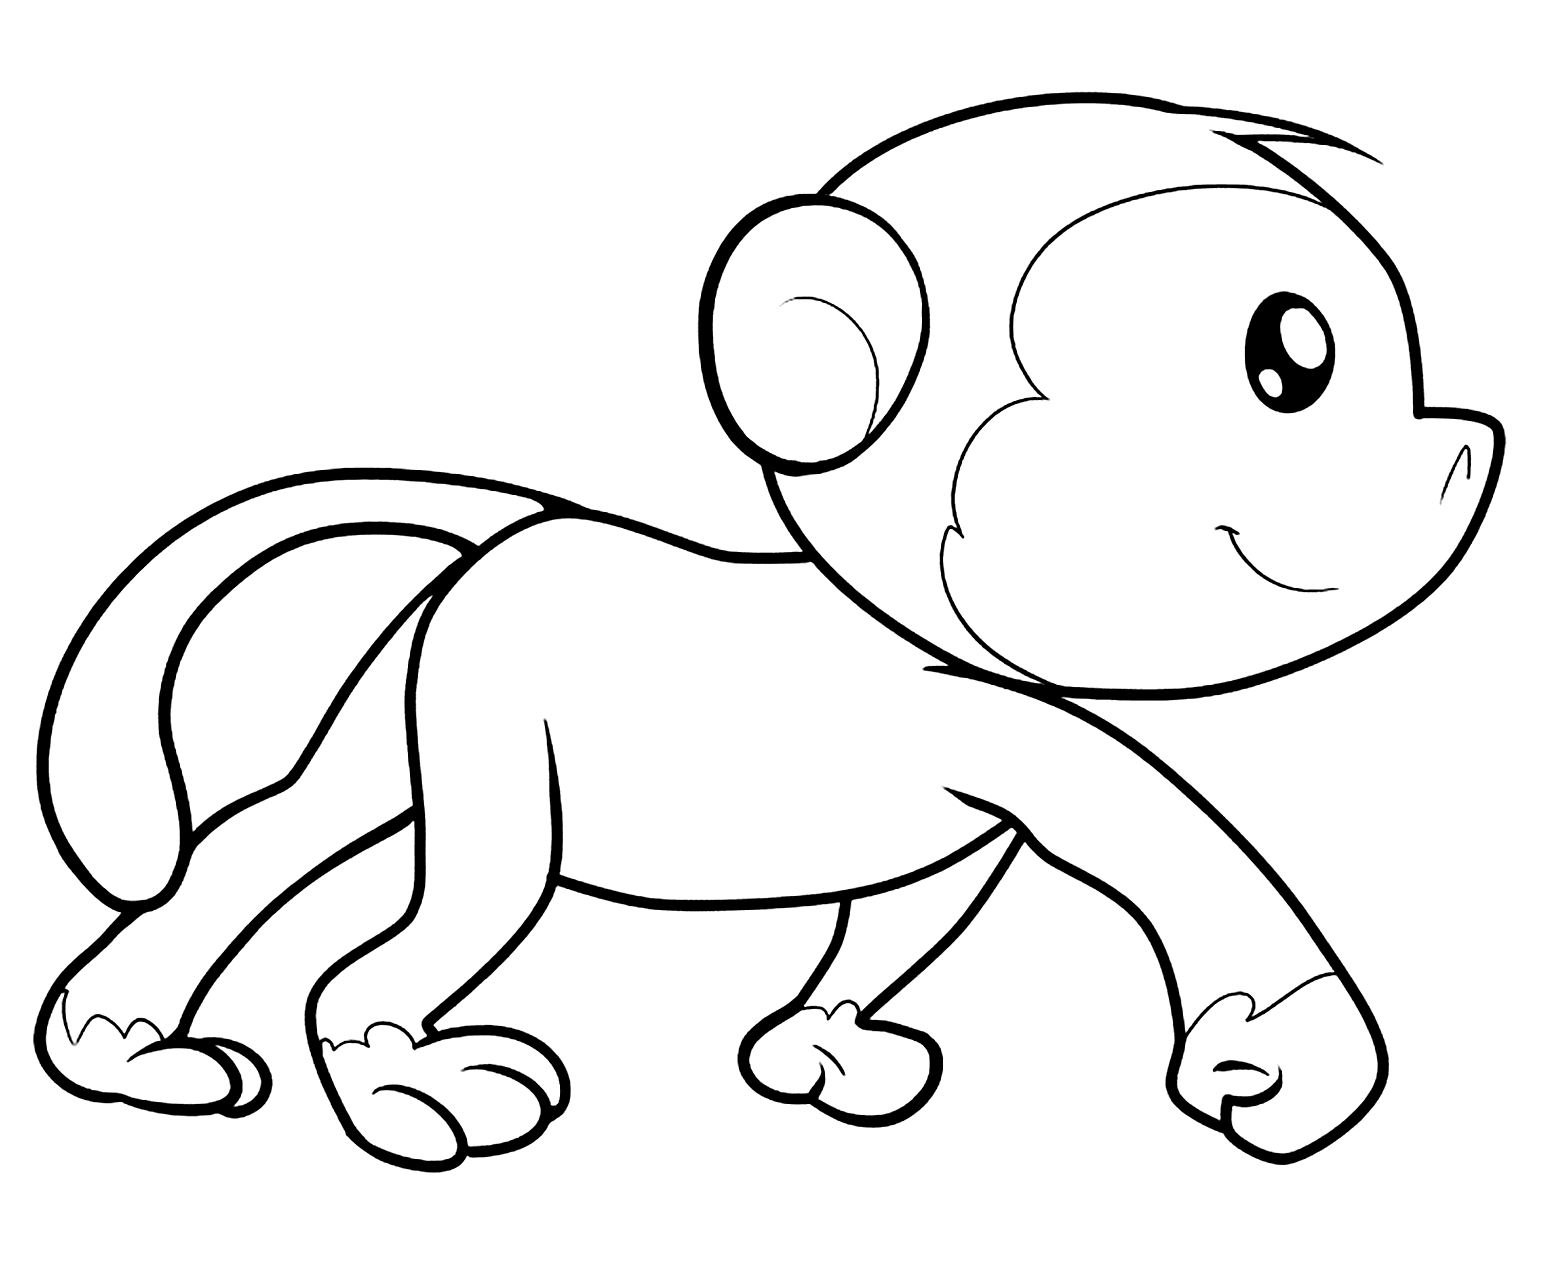 Monkey Coloring Pictures For Kids